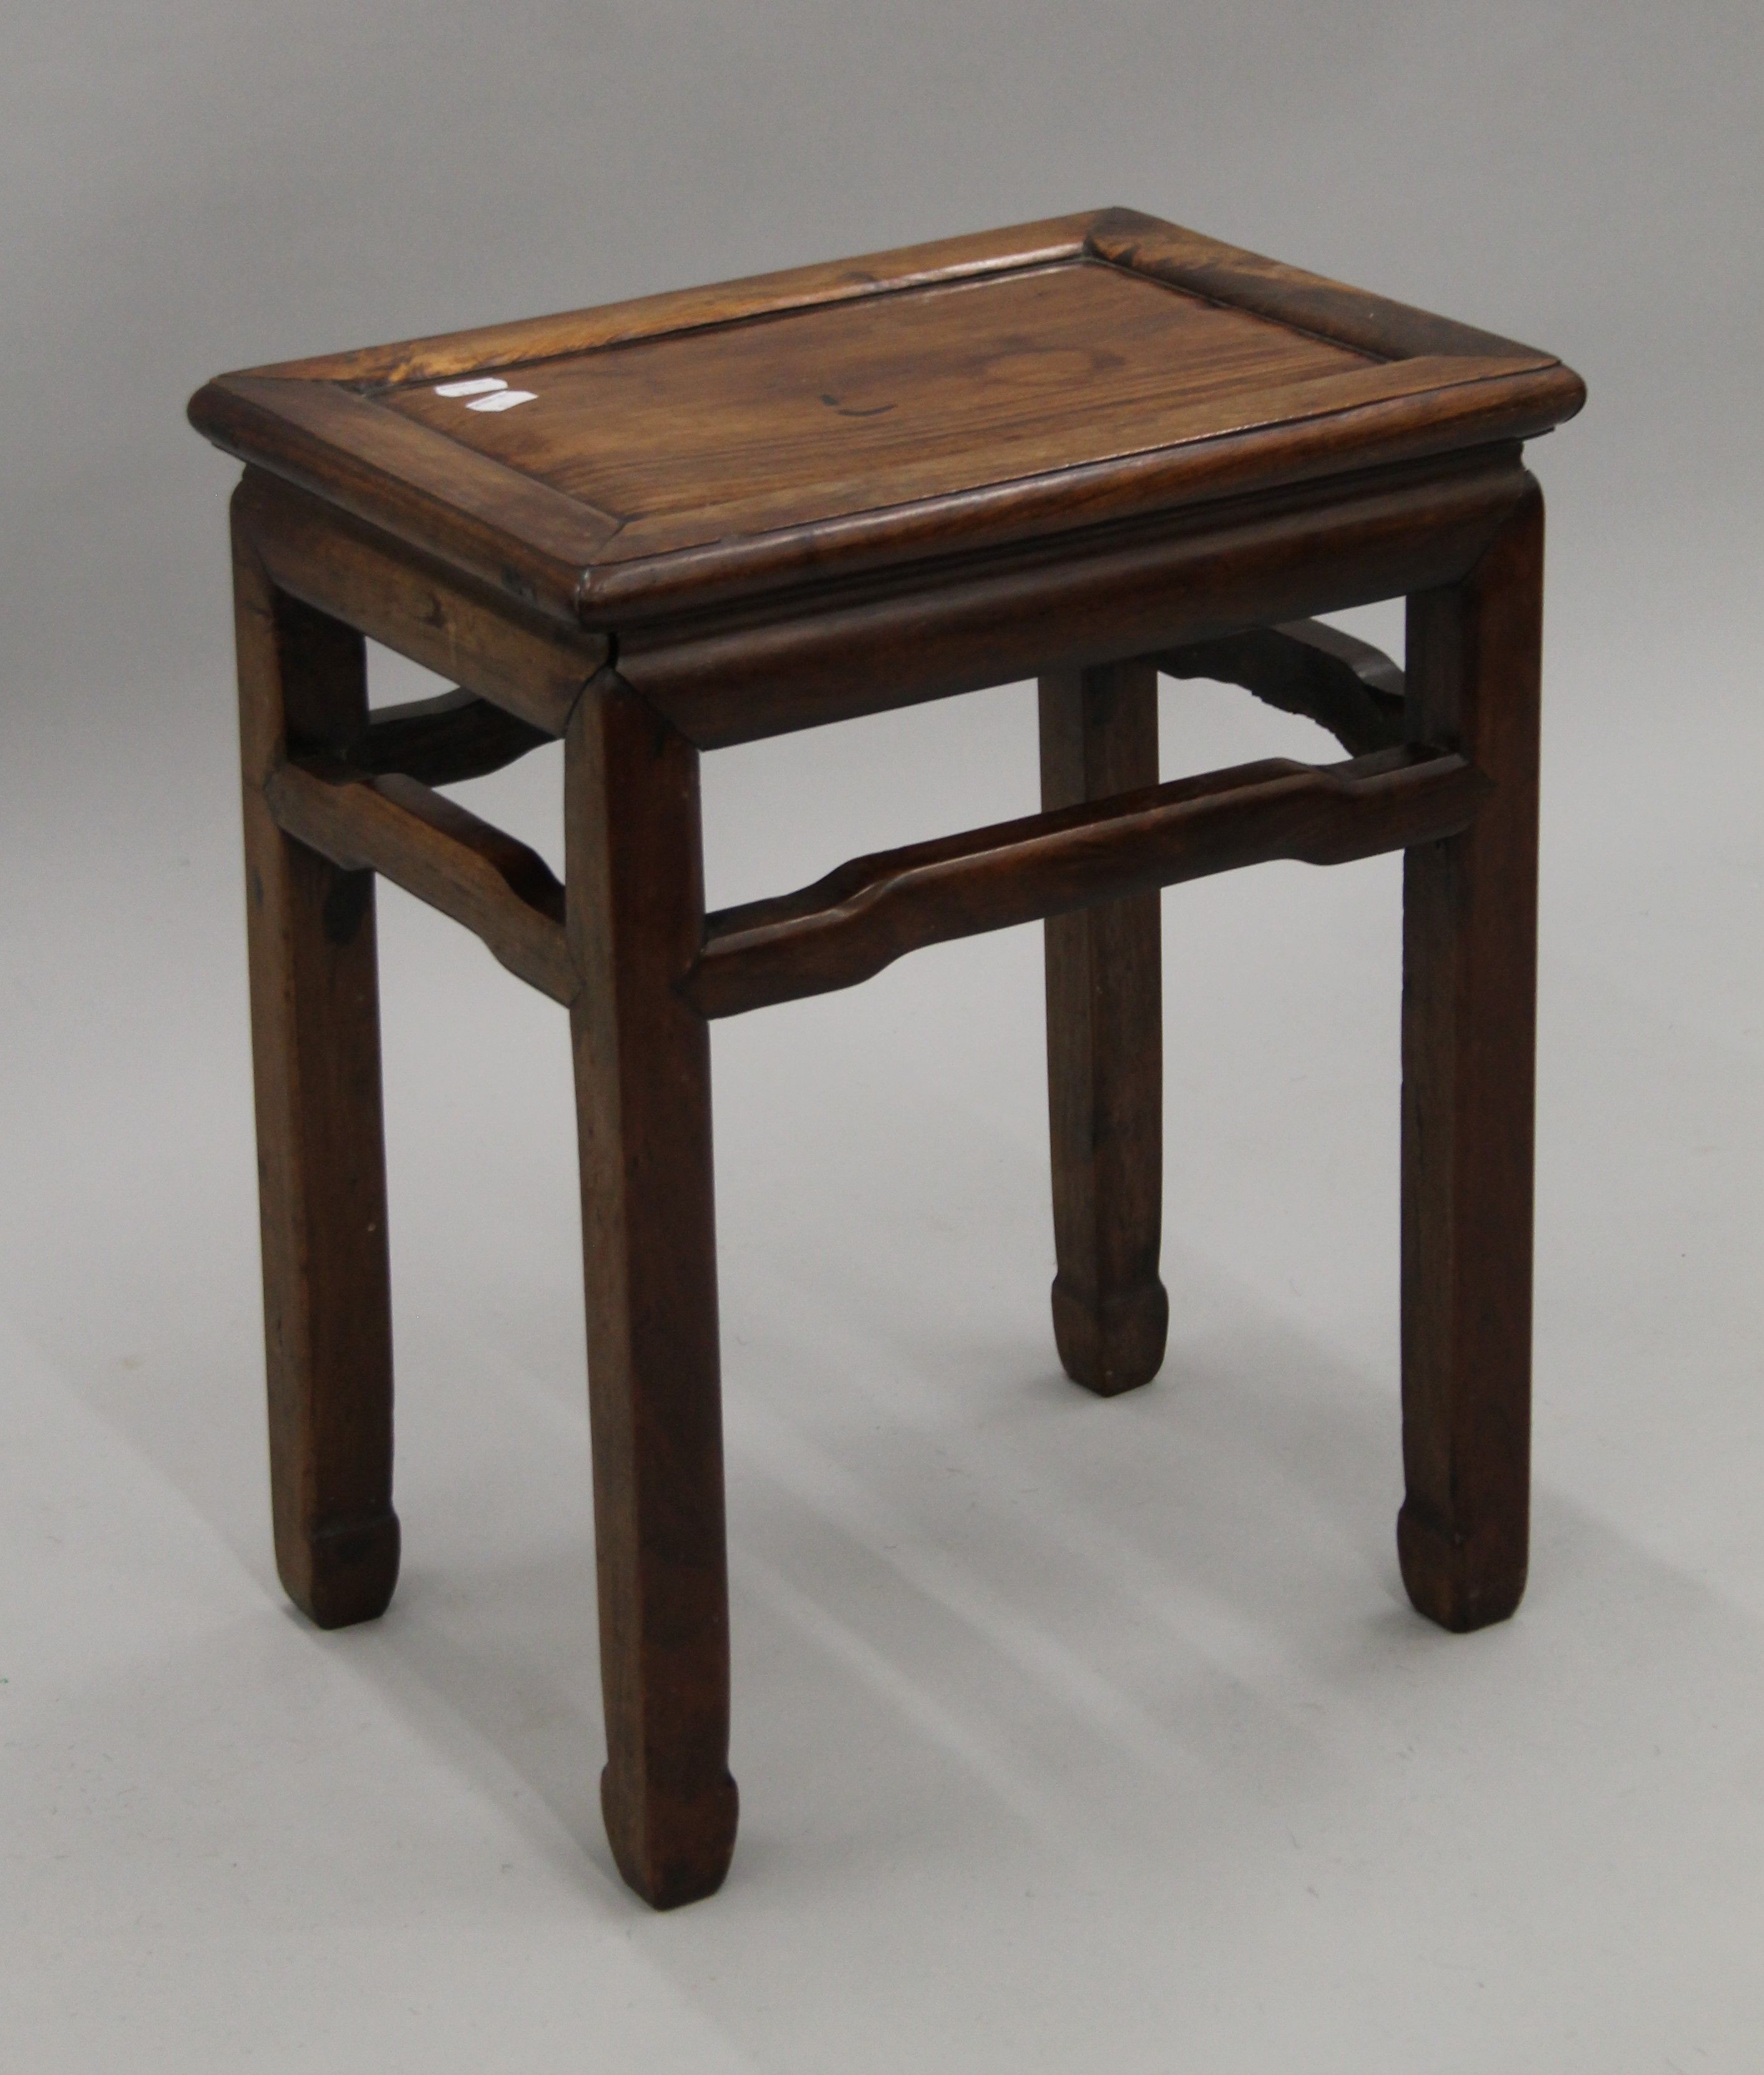 A 19th century Chinese rectangular hardwood stand. 50 cm high. - Image 2 of 5